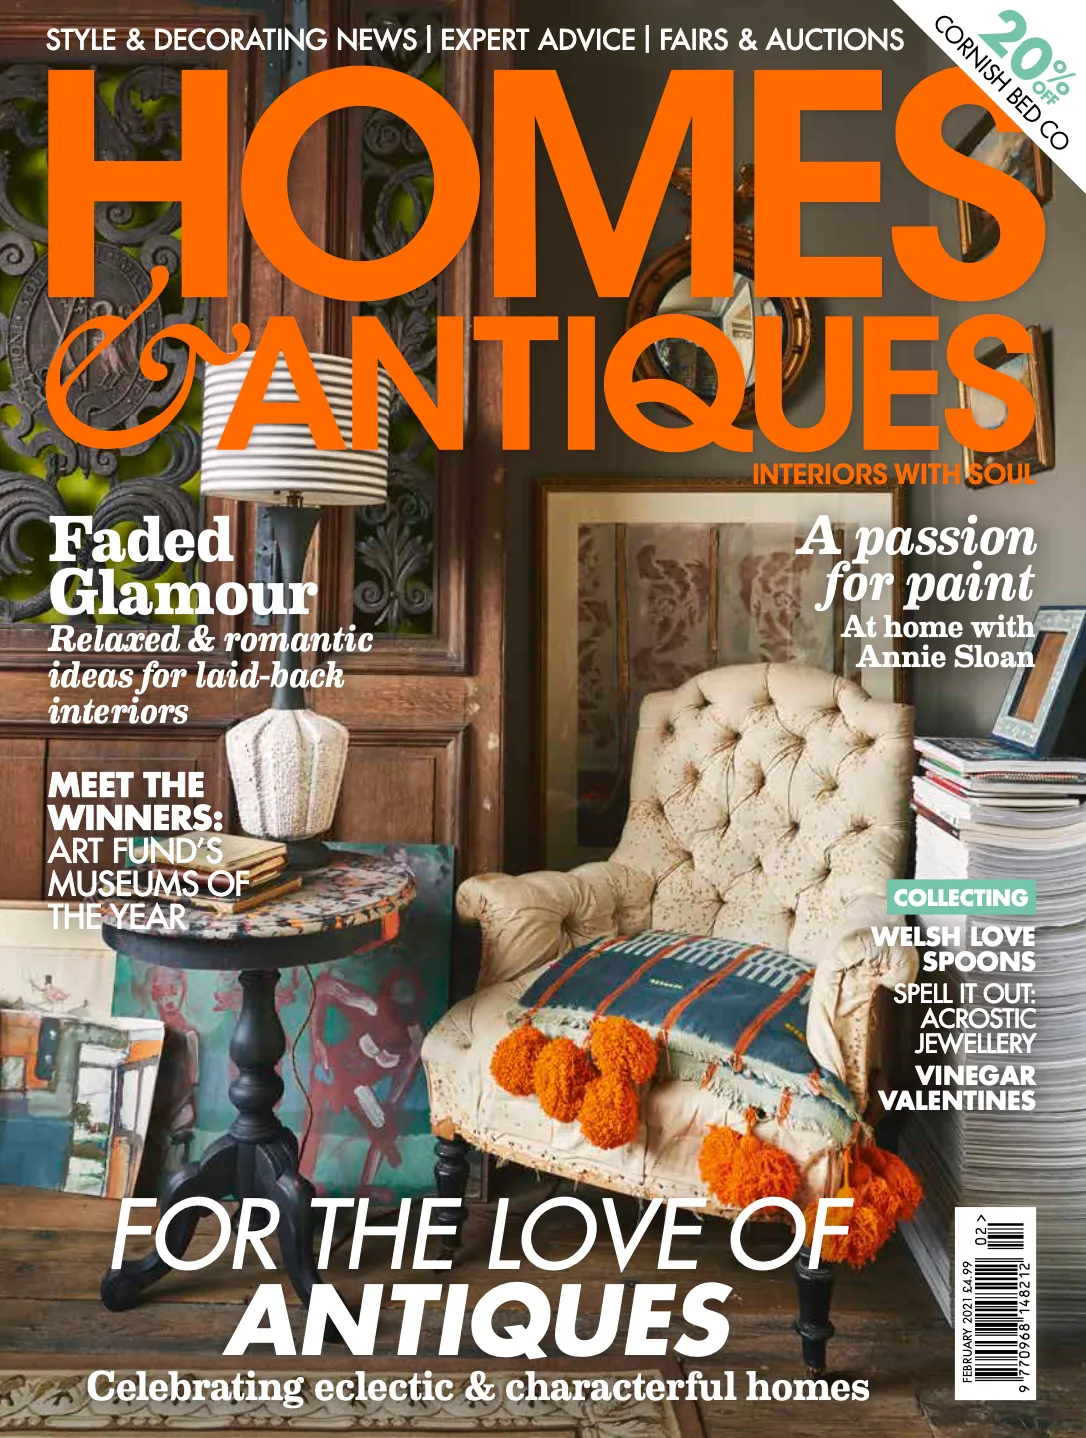 Homes & Antiques February 2021 cover